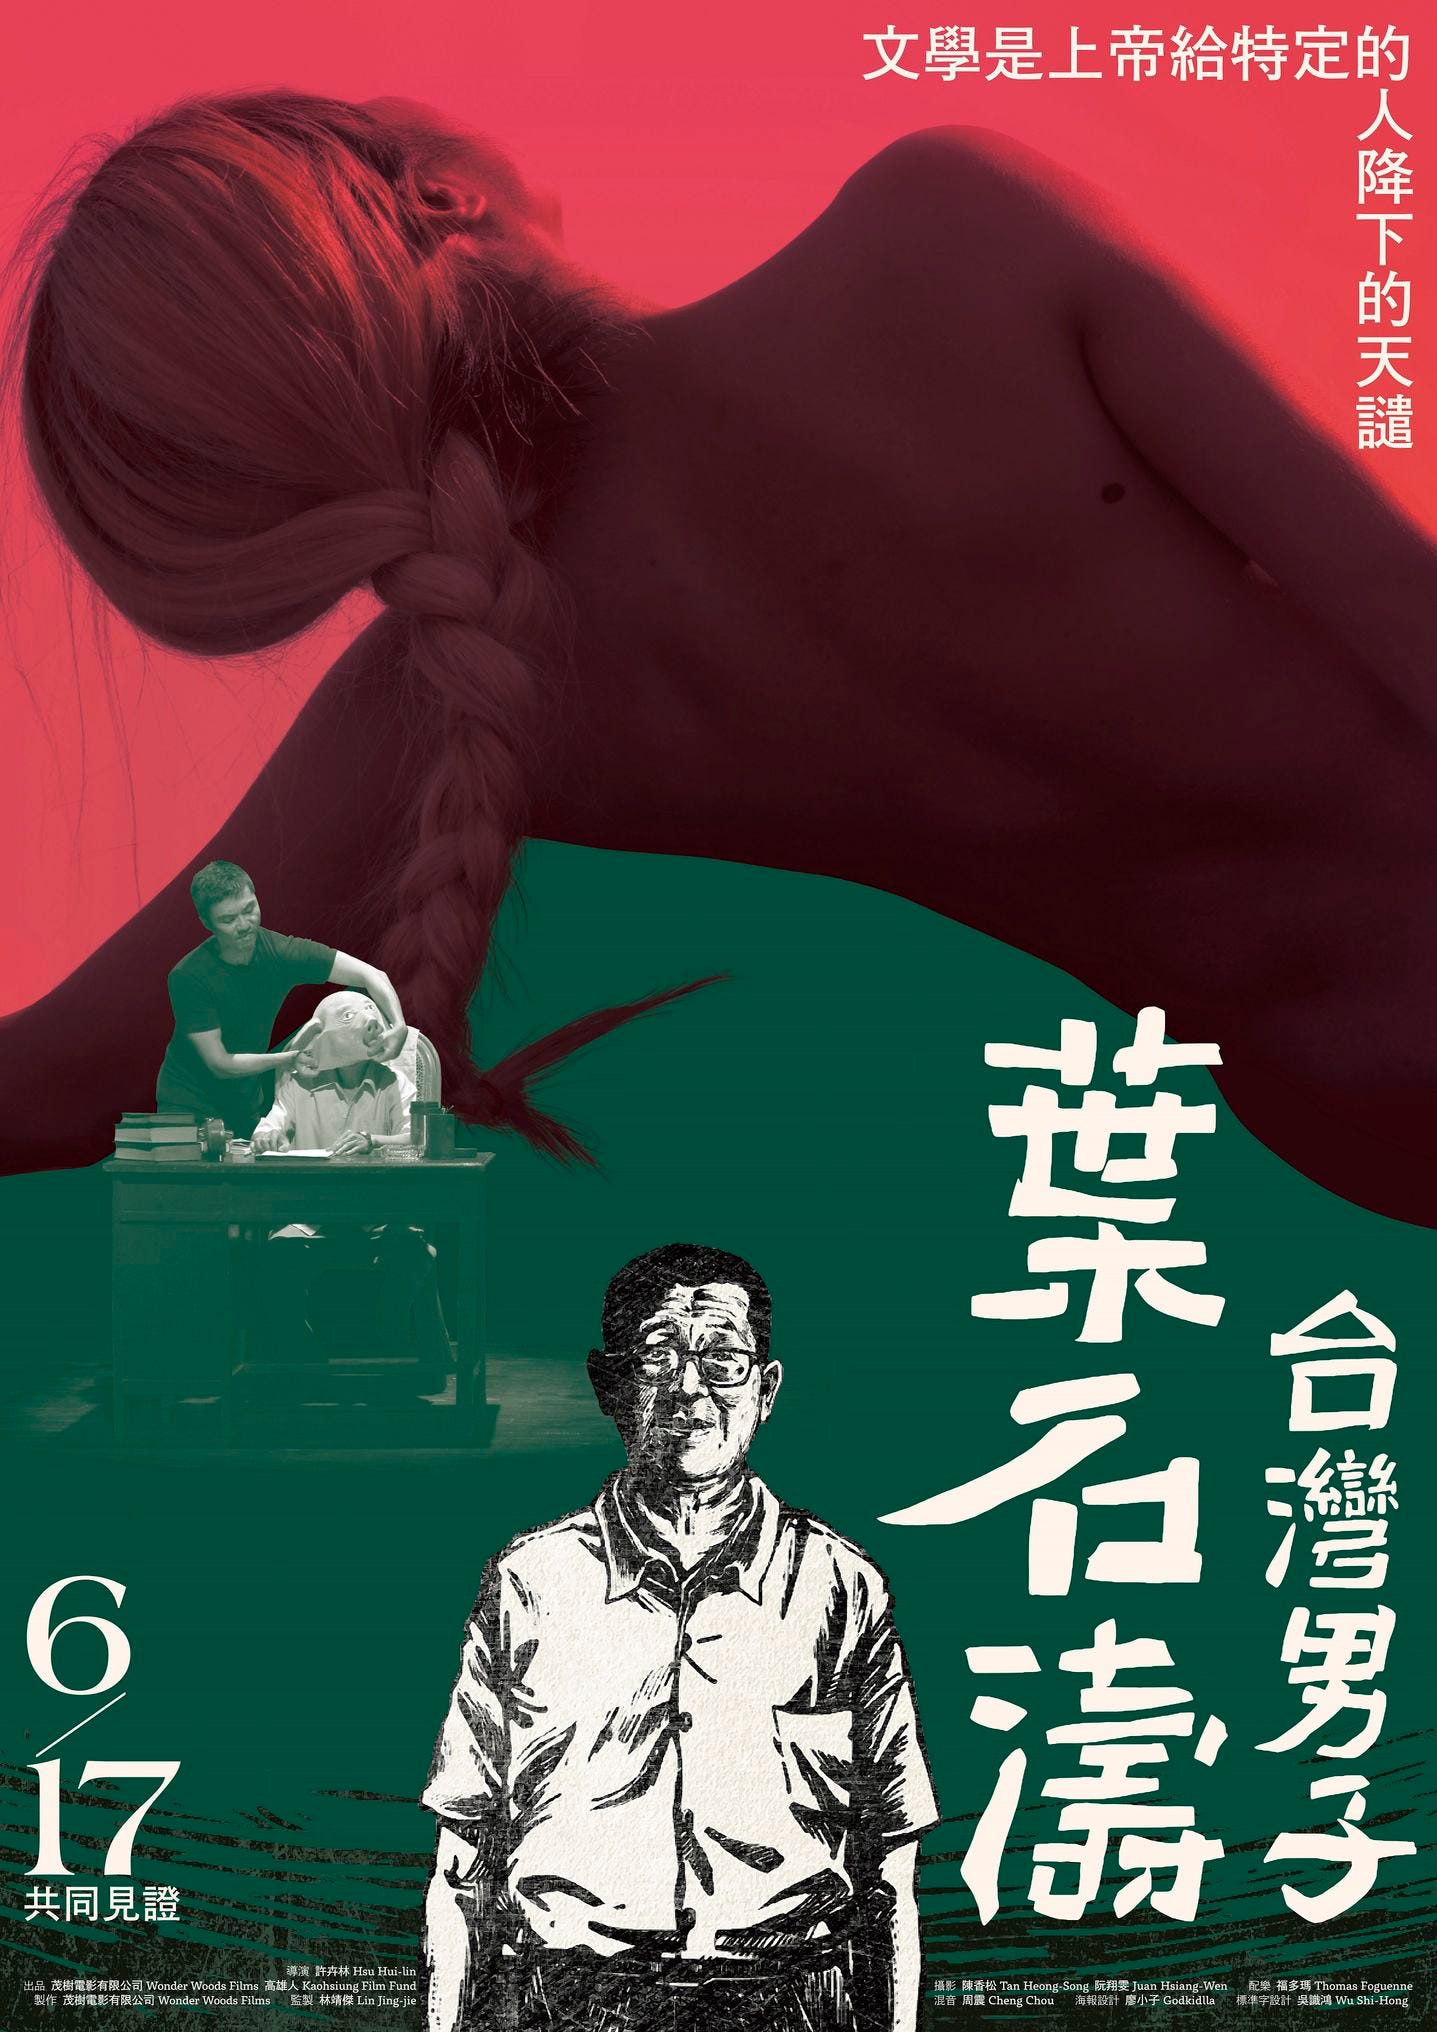 The official poster to “Yeh Shih-tao: A Taiwan Man,” the 2022 documentary directed by Hsu Hui-lin 許卉林